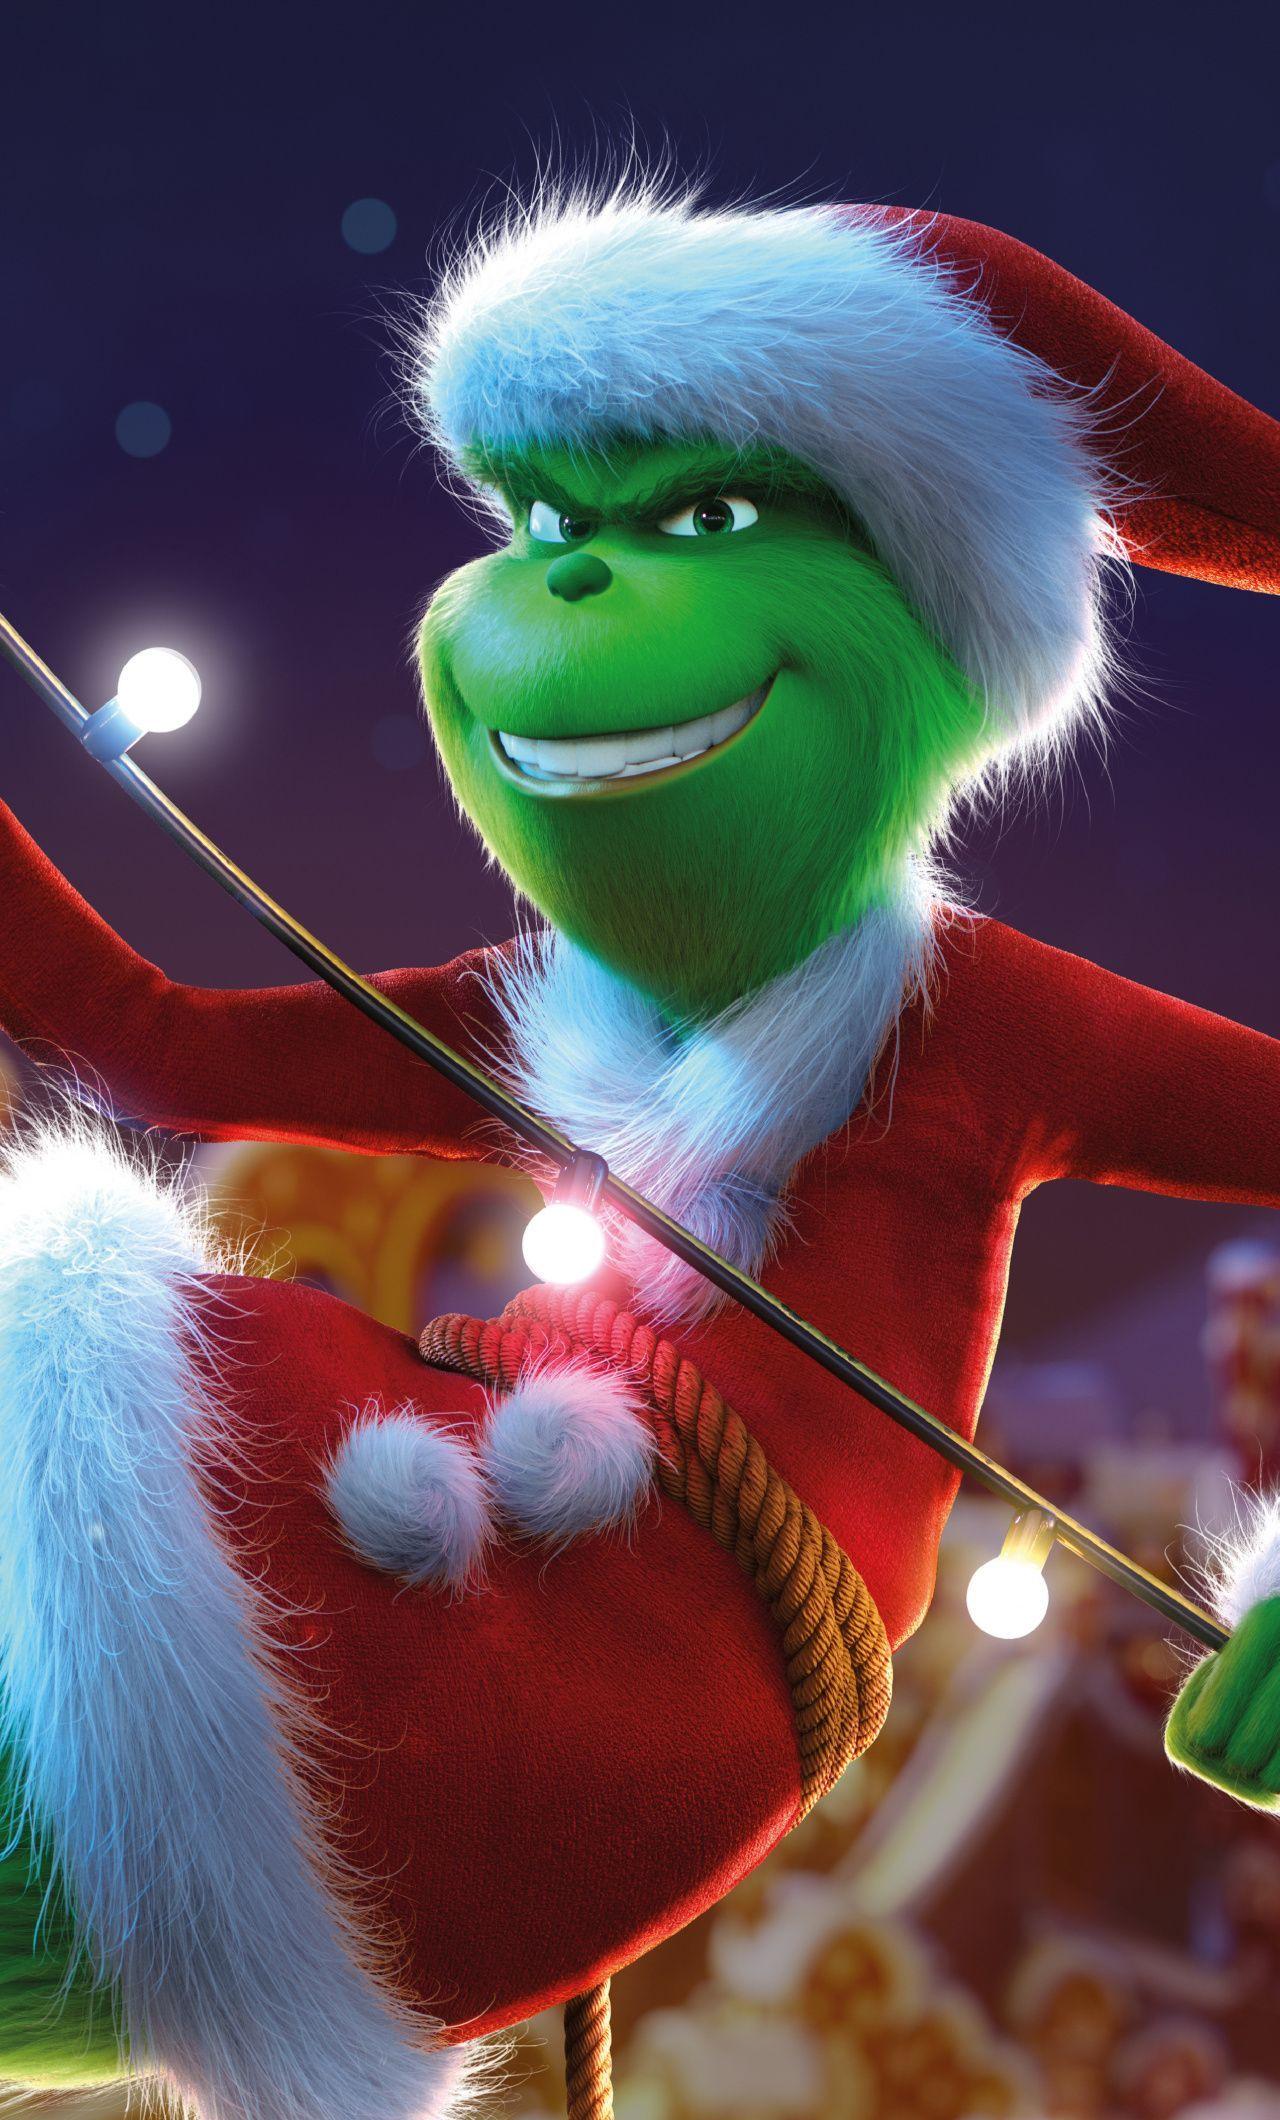 The Grinch 2018 Wallpapers - Top Free The Grinch 2018 Backgrounds - What Can I Watch The Grinch On For Free